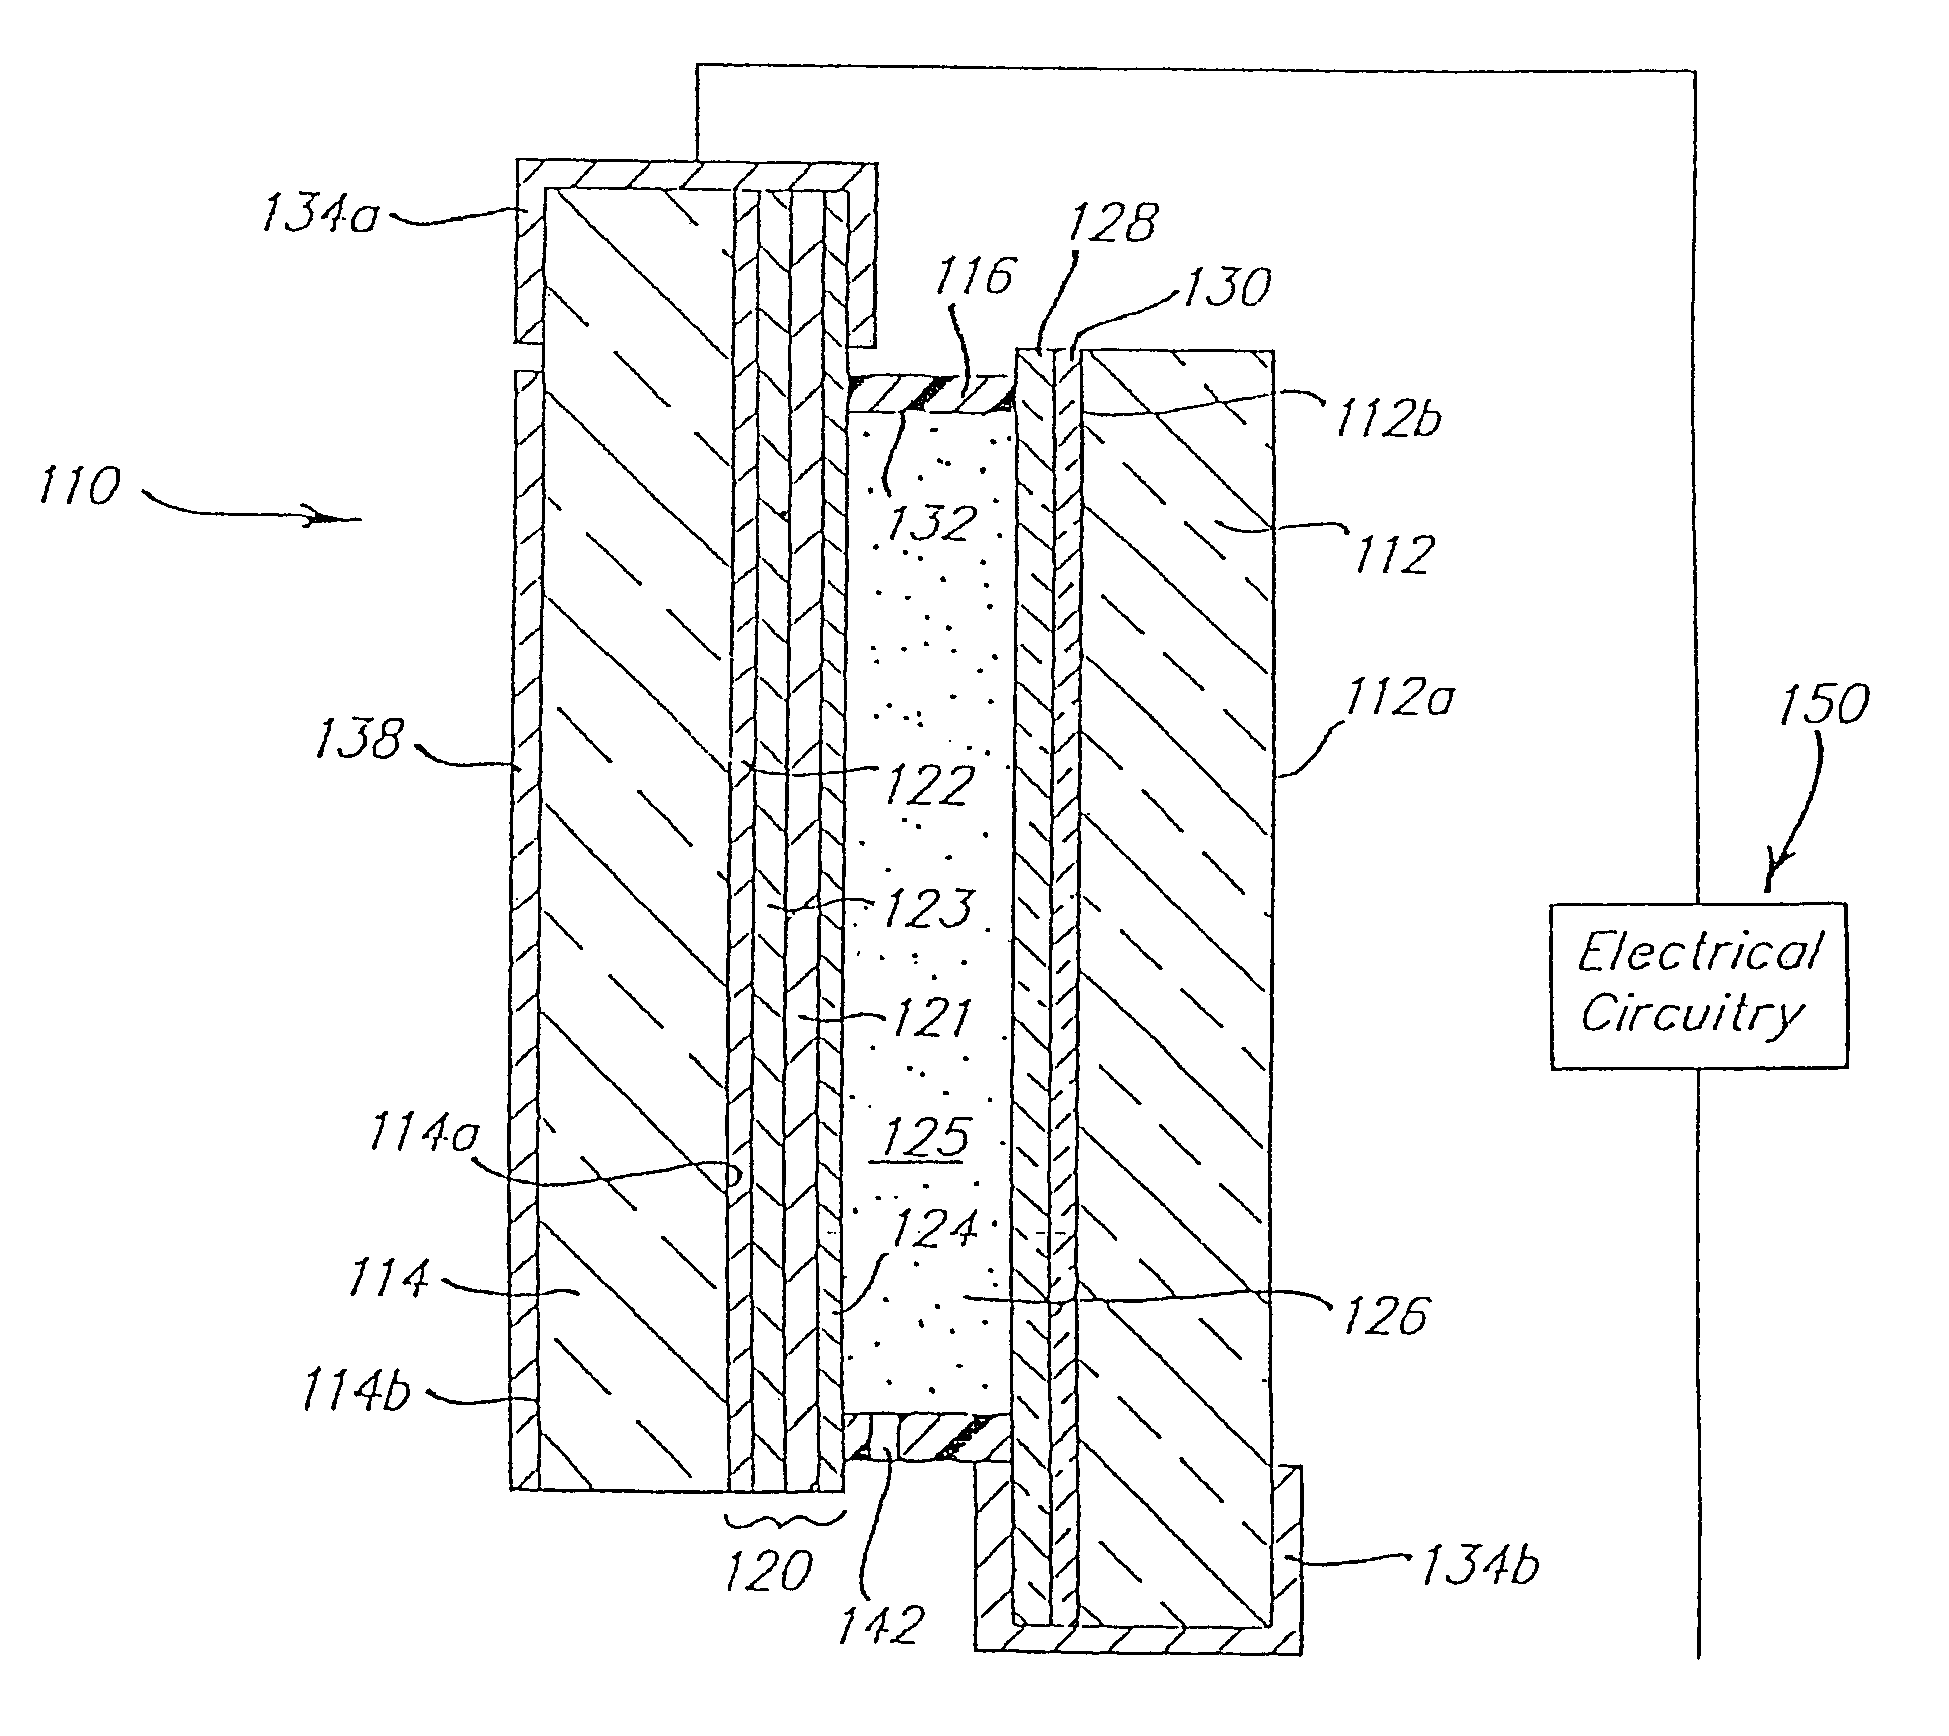 Electrochromic rearview mirror assembly incorporating a display/signal light